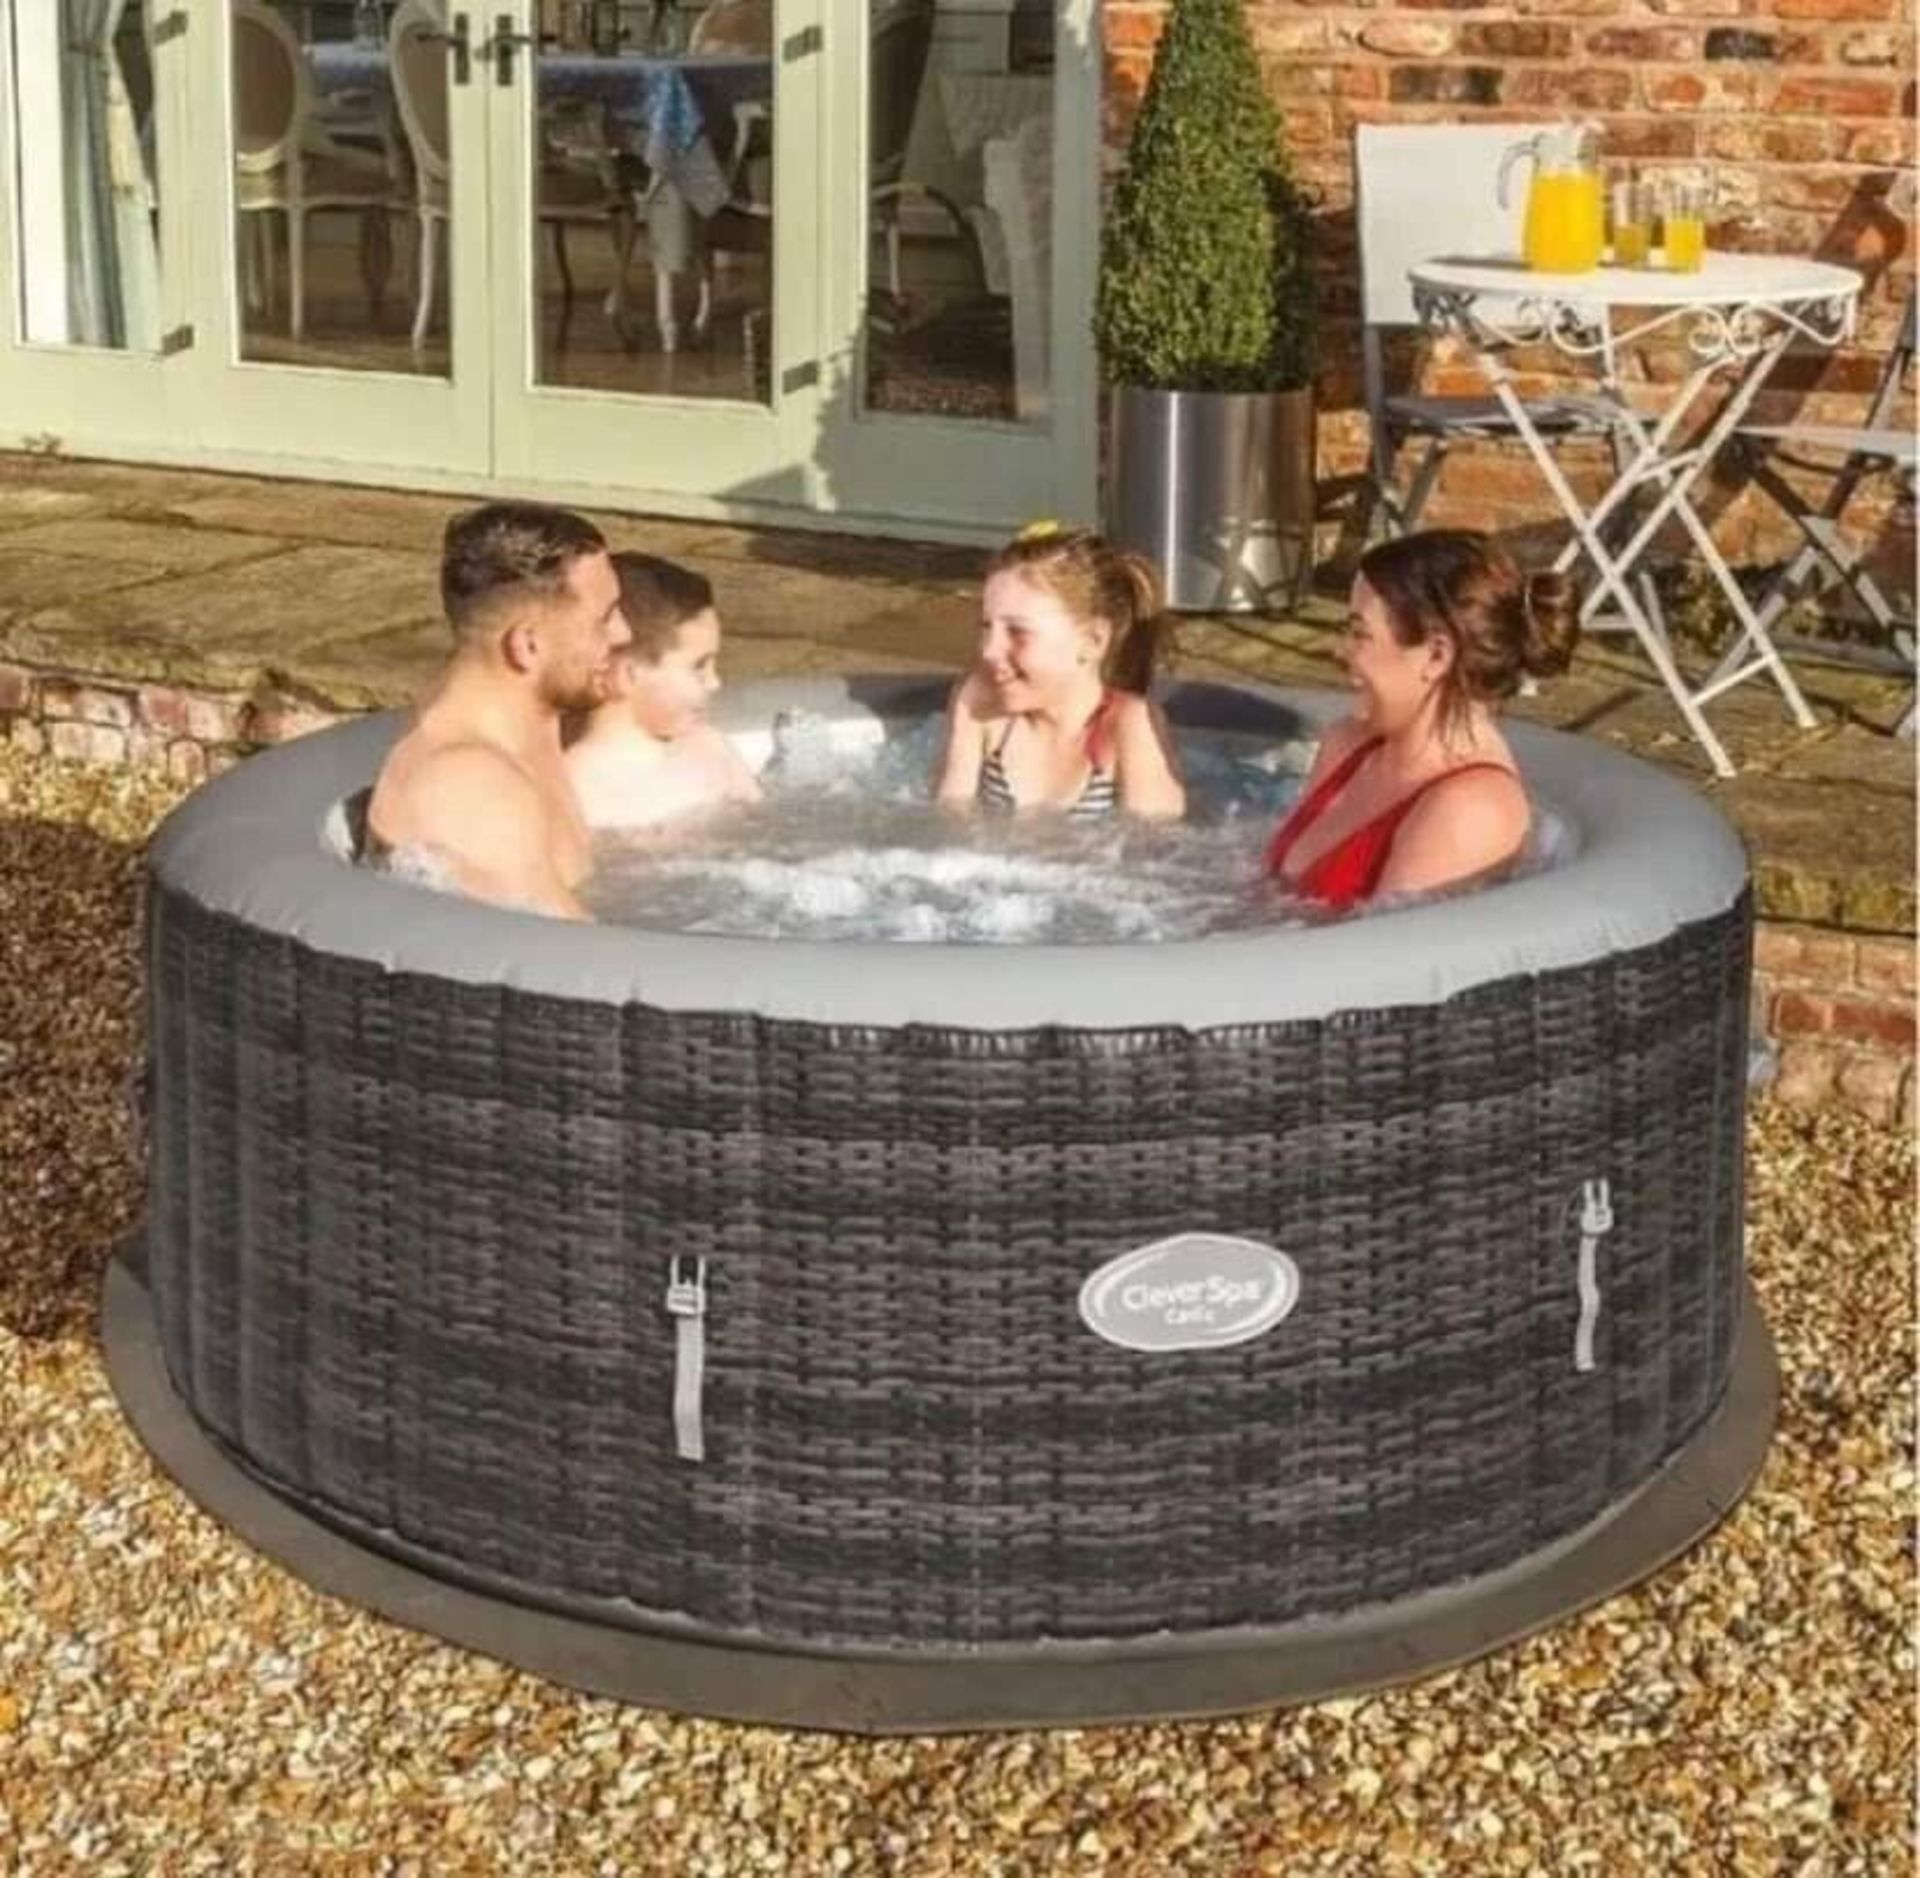 NEW CATIZ 4 PERSON JACUZZI - BUILT IN PUMP AND HEATER - 110 AIR JETS - INFLATES IN 5 MINUTES - Bild 2 aus 2